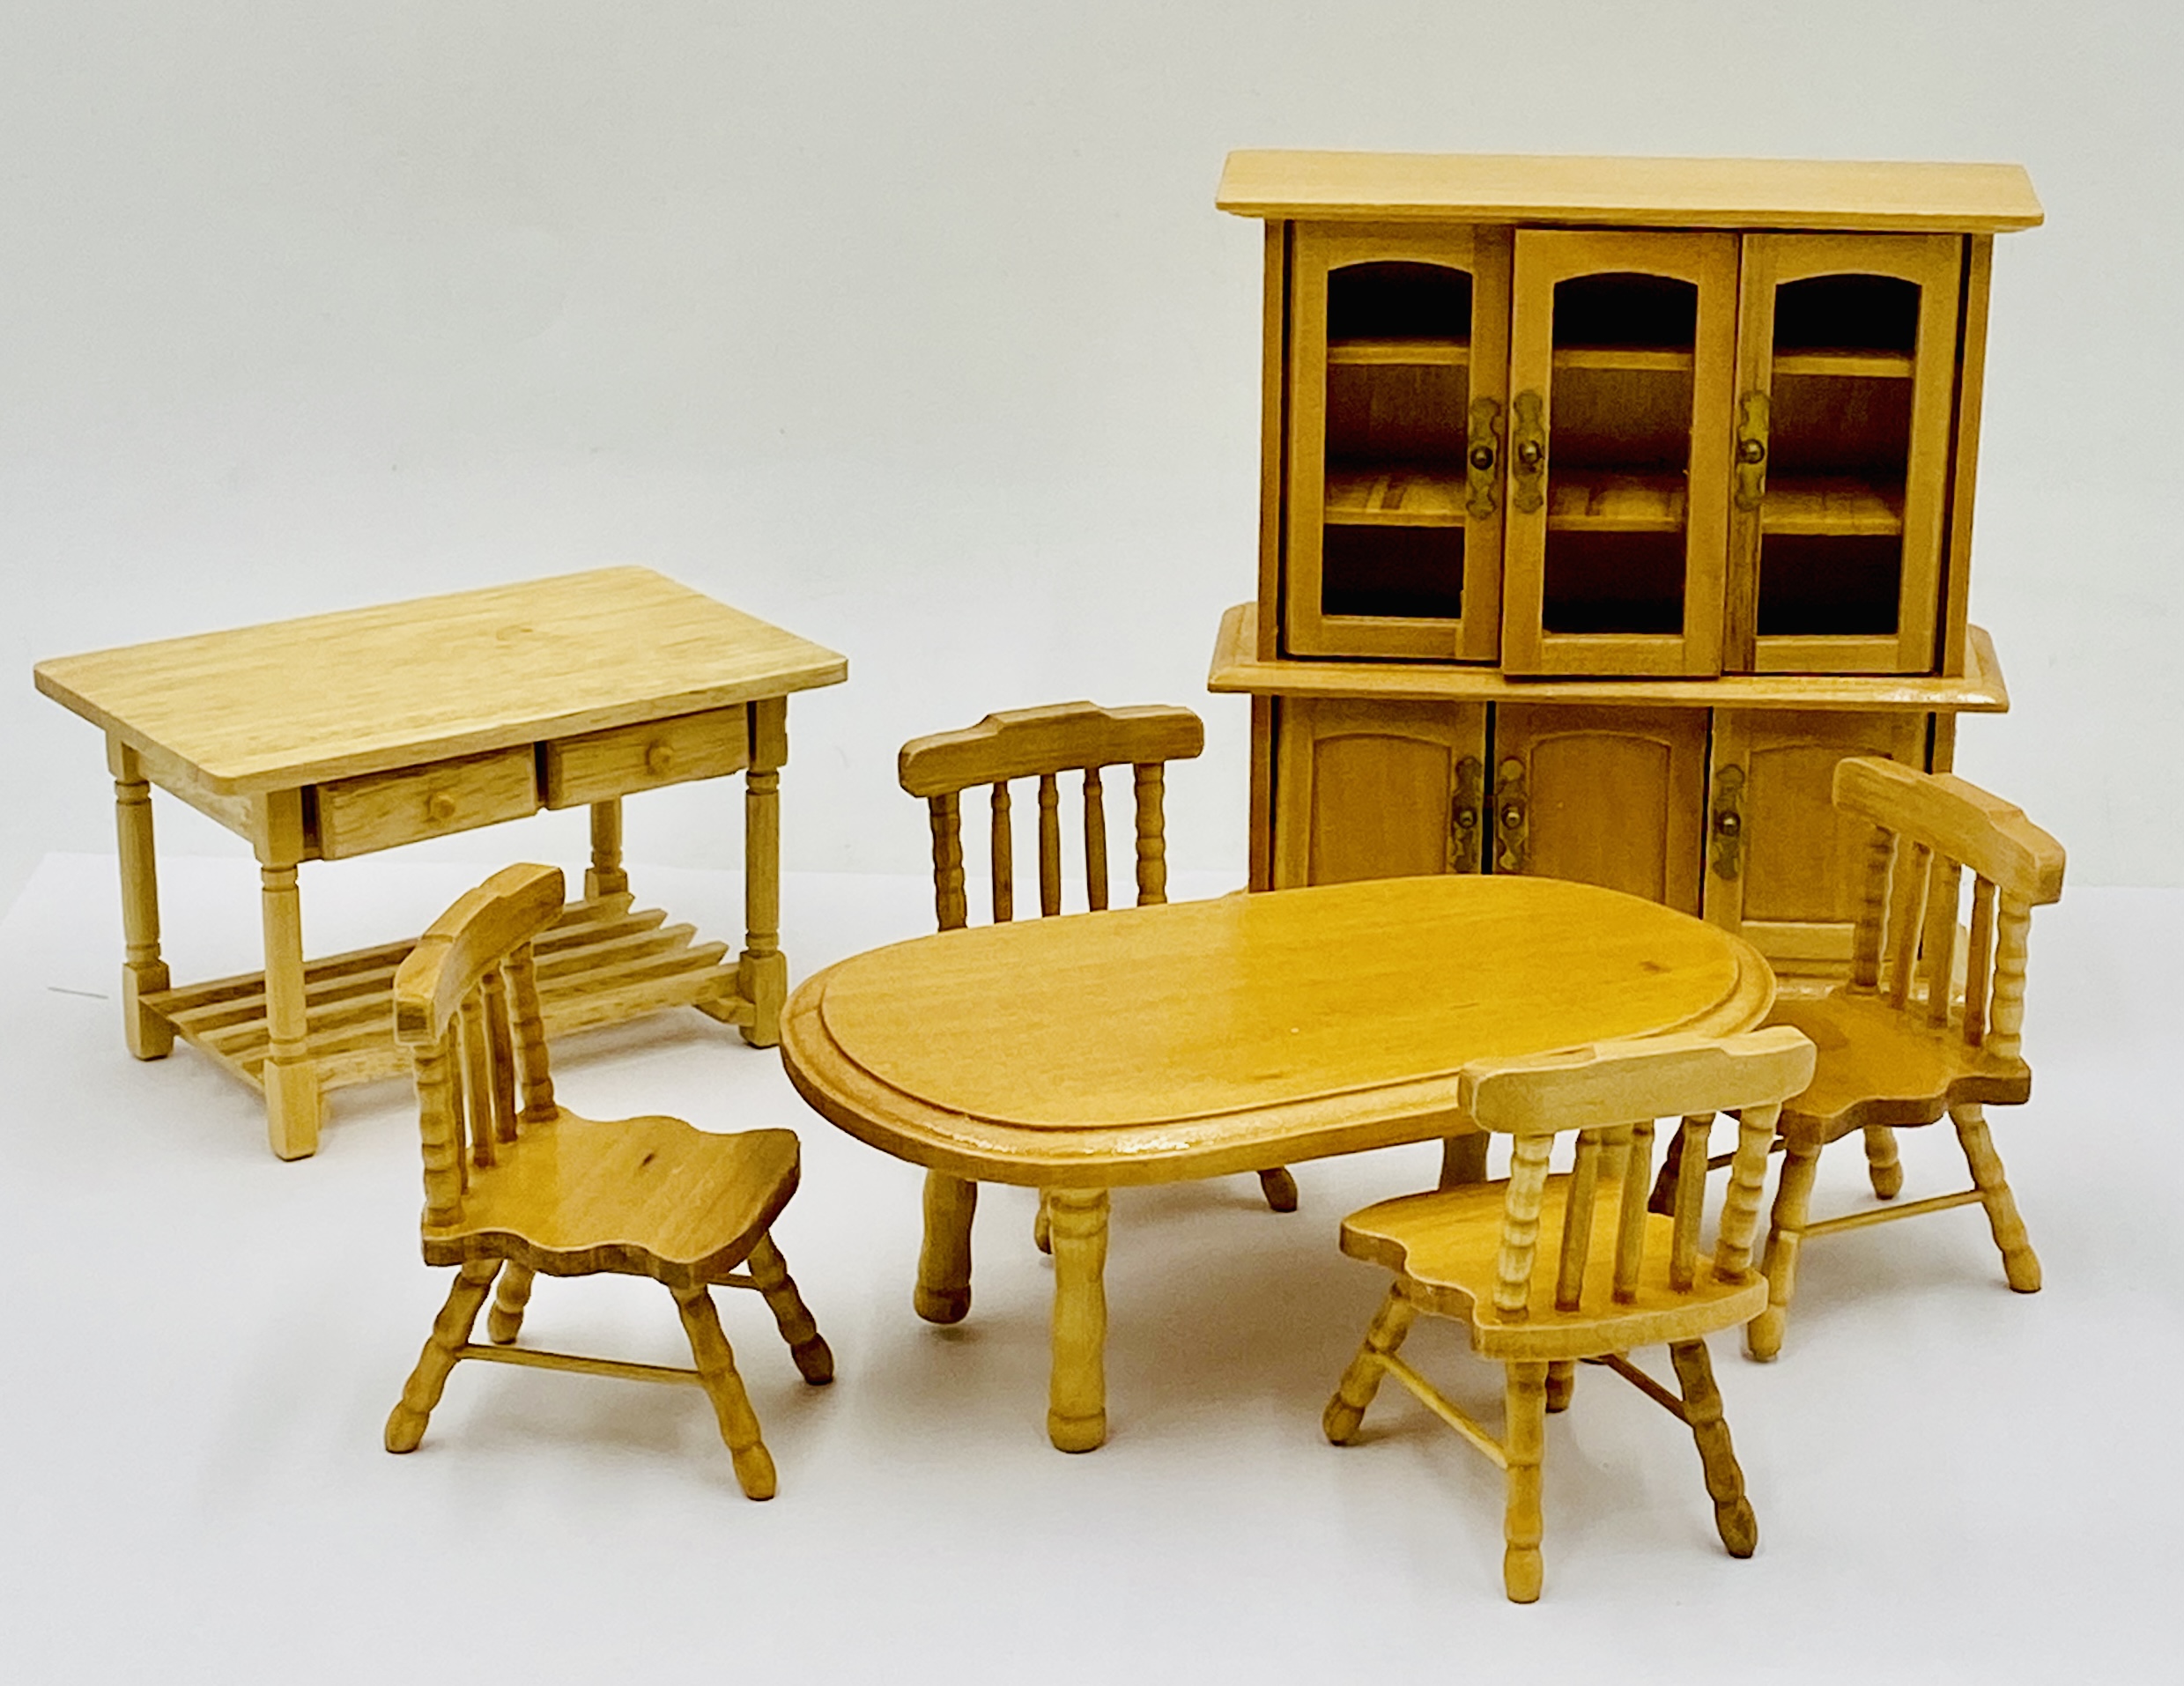 A collection of dolls house furniture including a floral three-piece suite, dining table and chairs, - Image 2 of 6